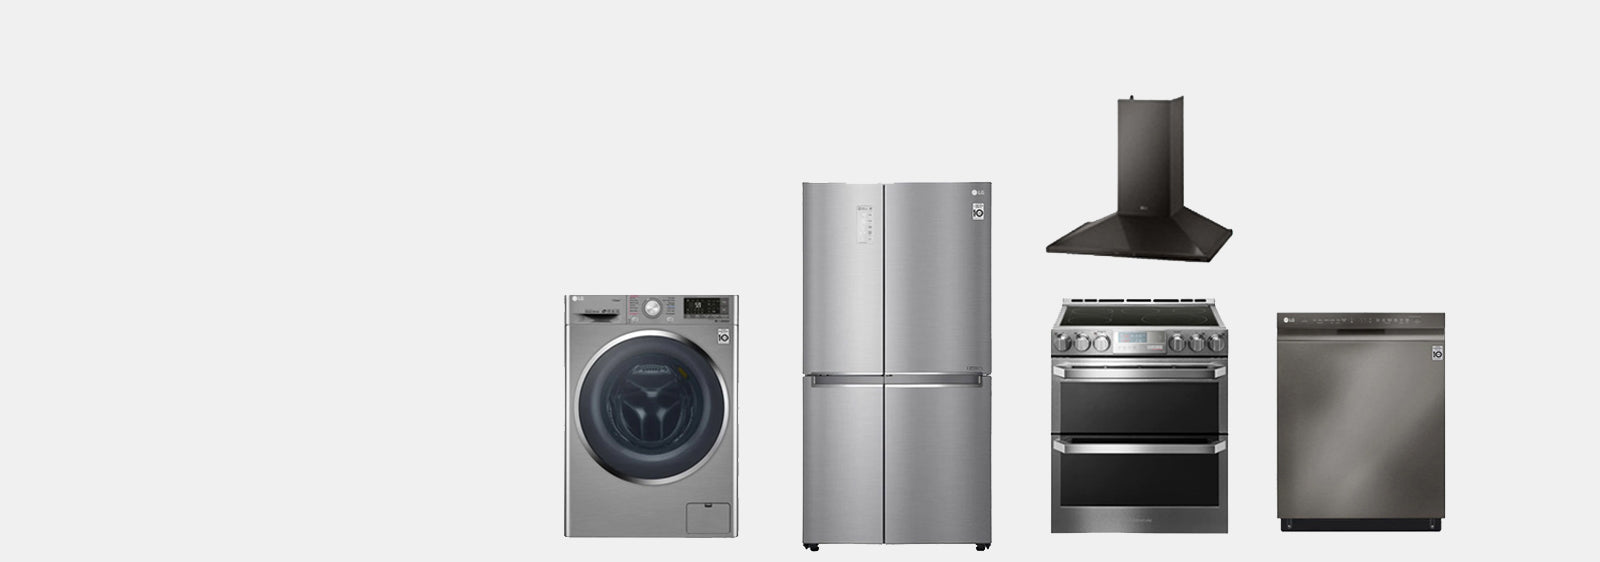 Top 12 Websites for Buying Appliance Replacement Parts